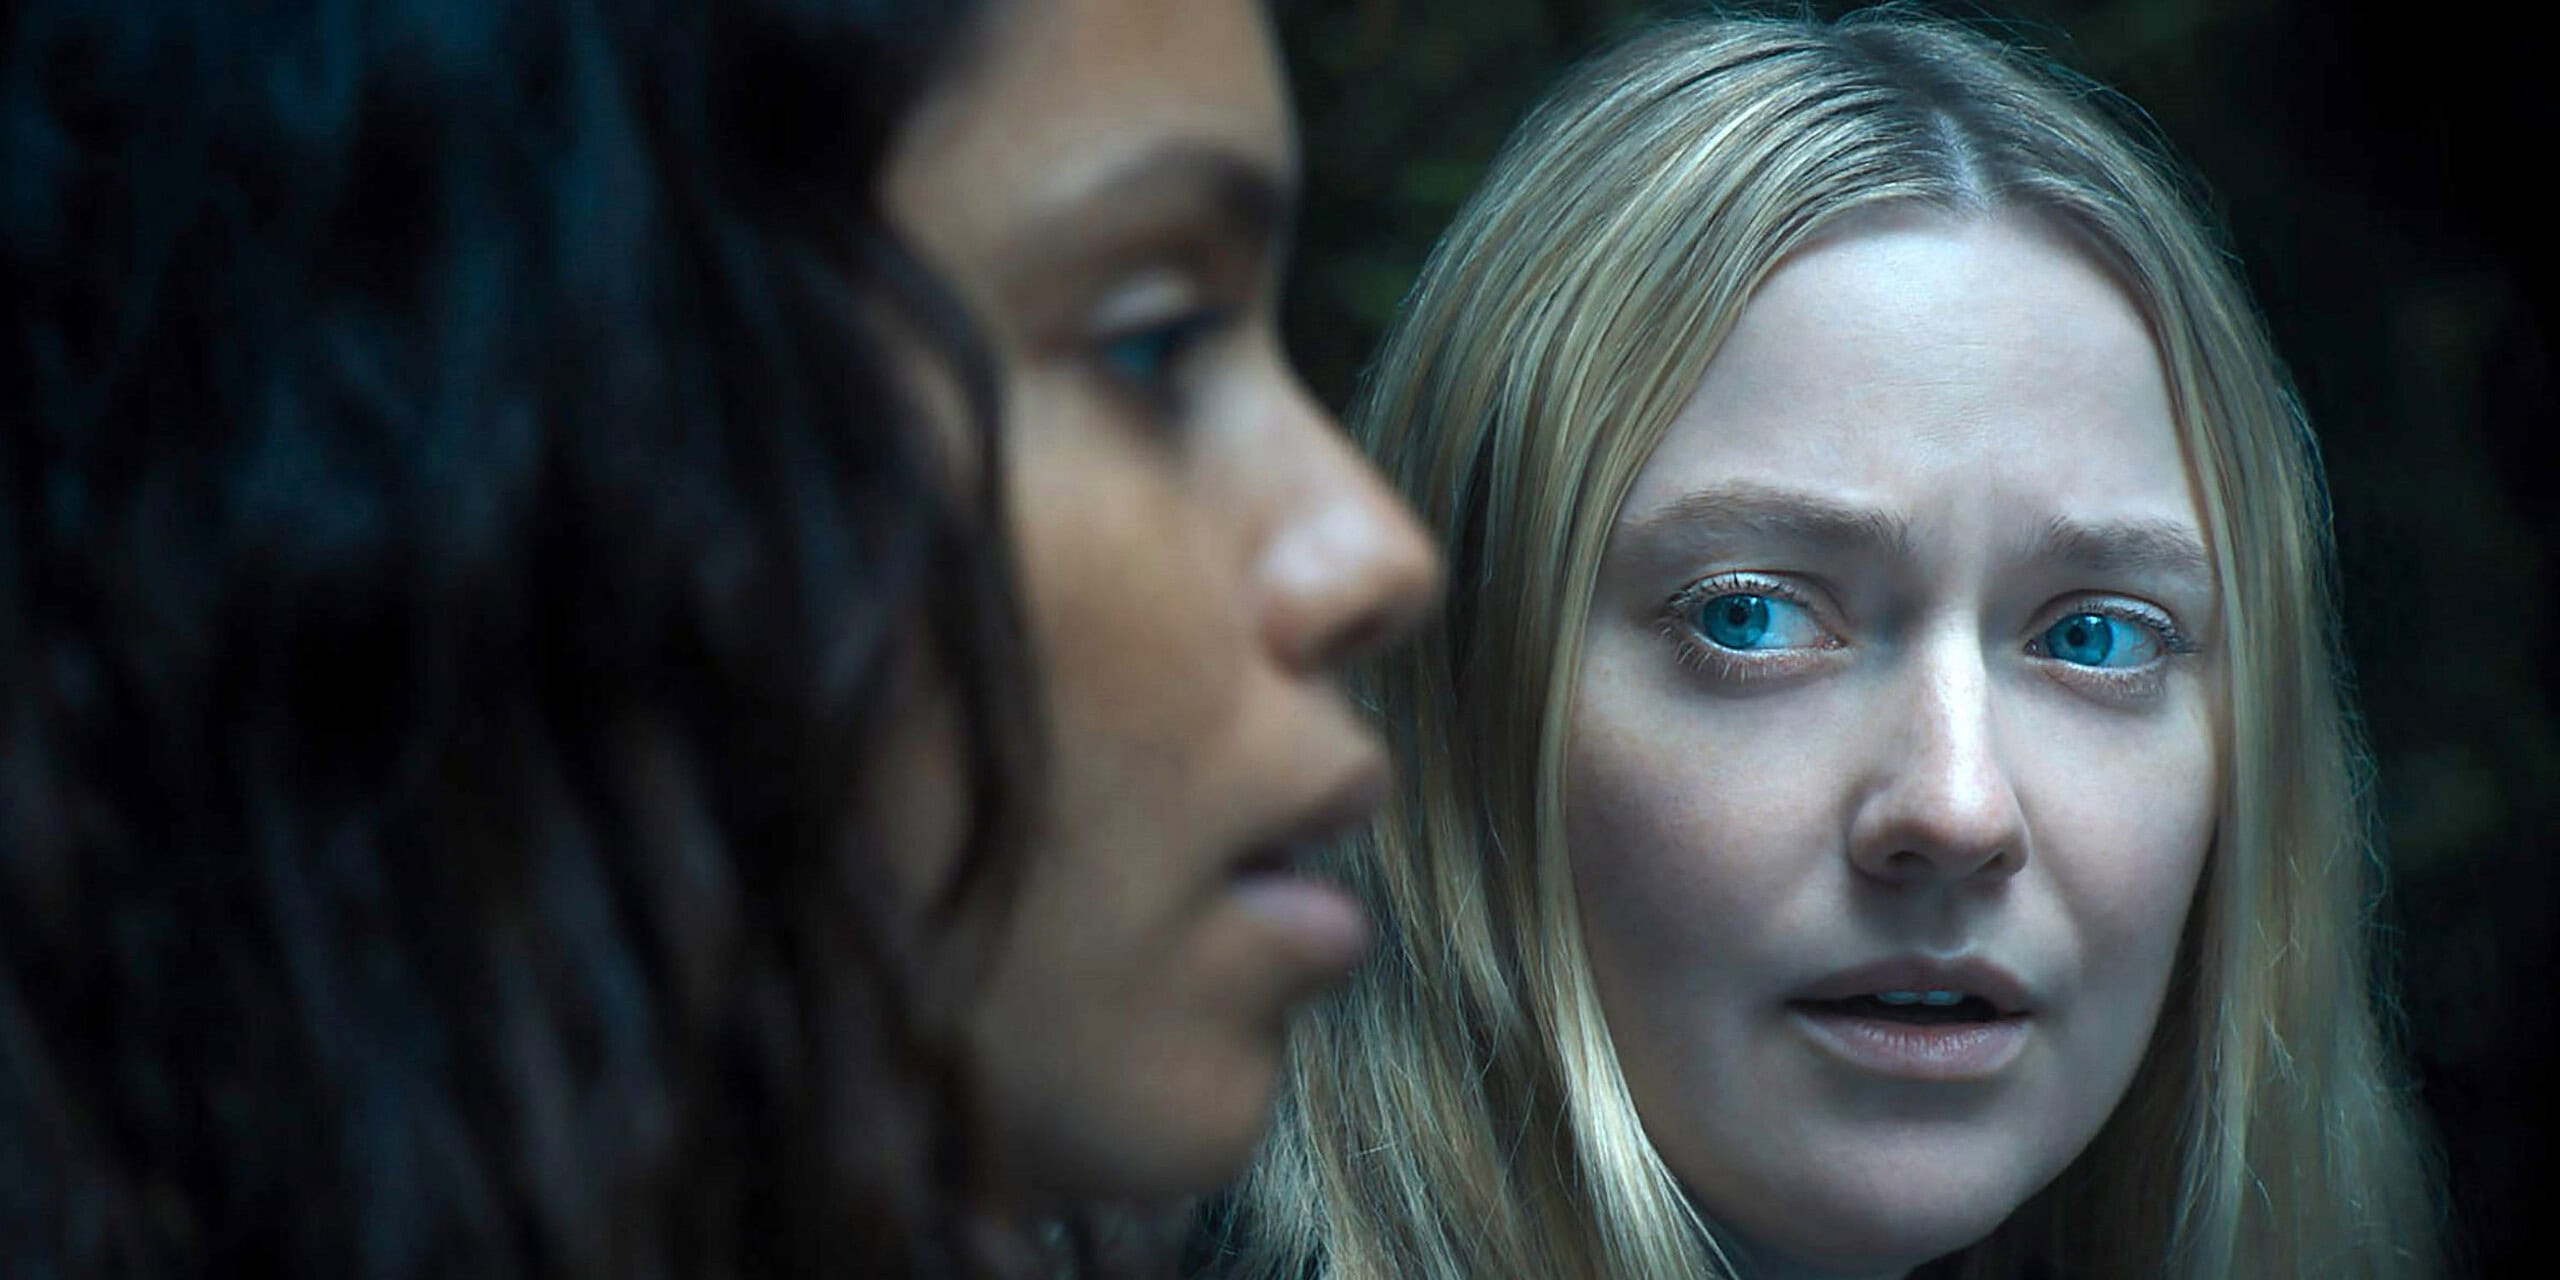 Ishana Night Shyamalan’s The Watchers: A Debut with Potential but Flawed Execution